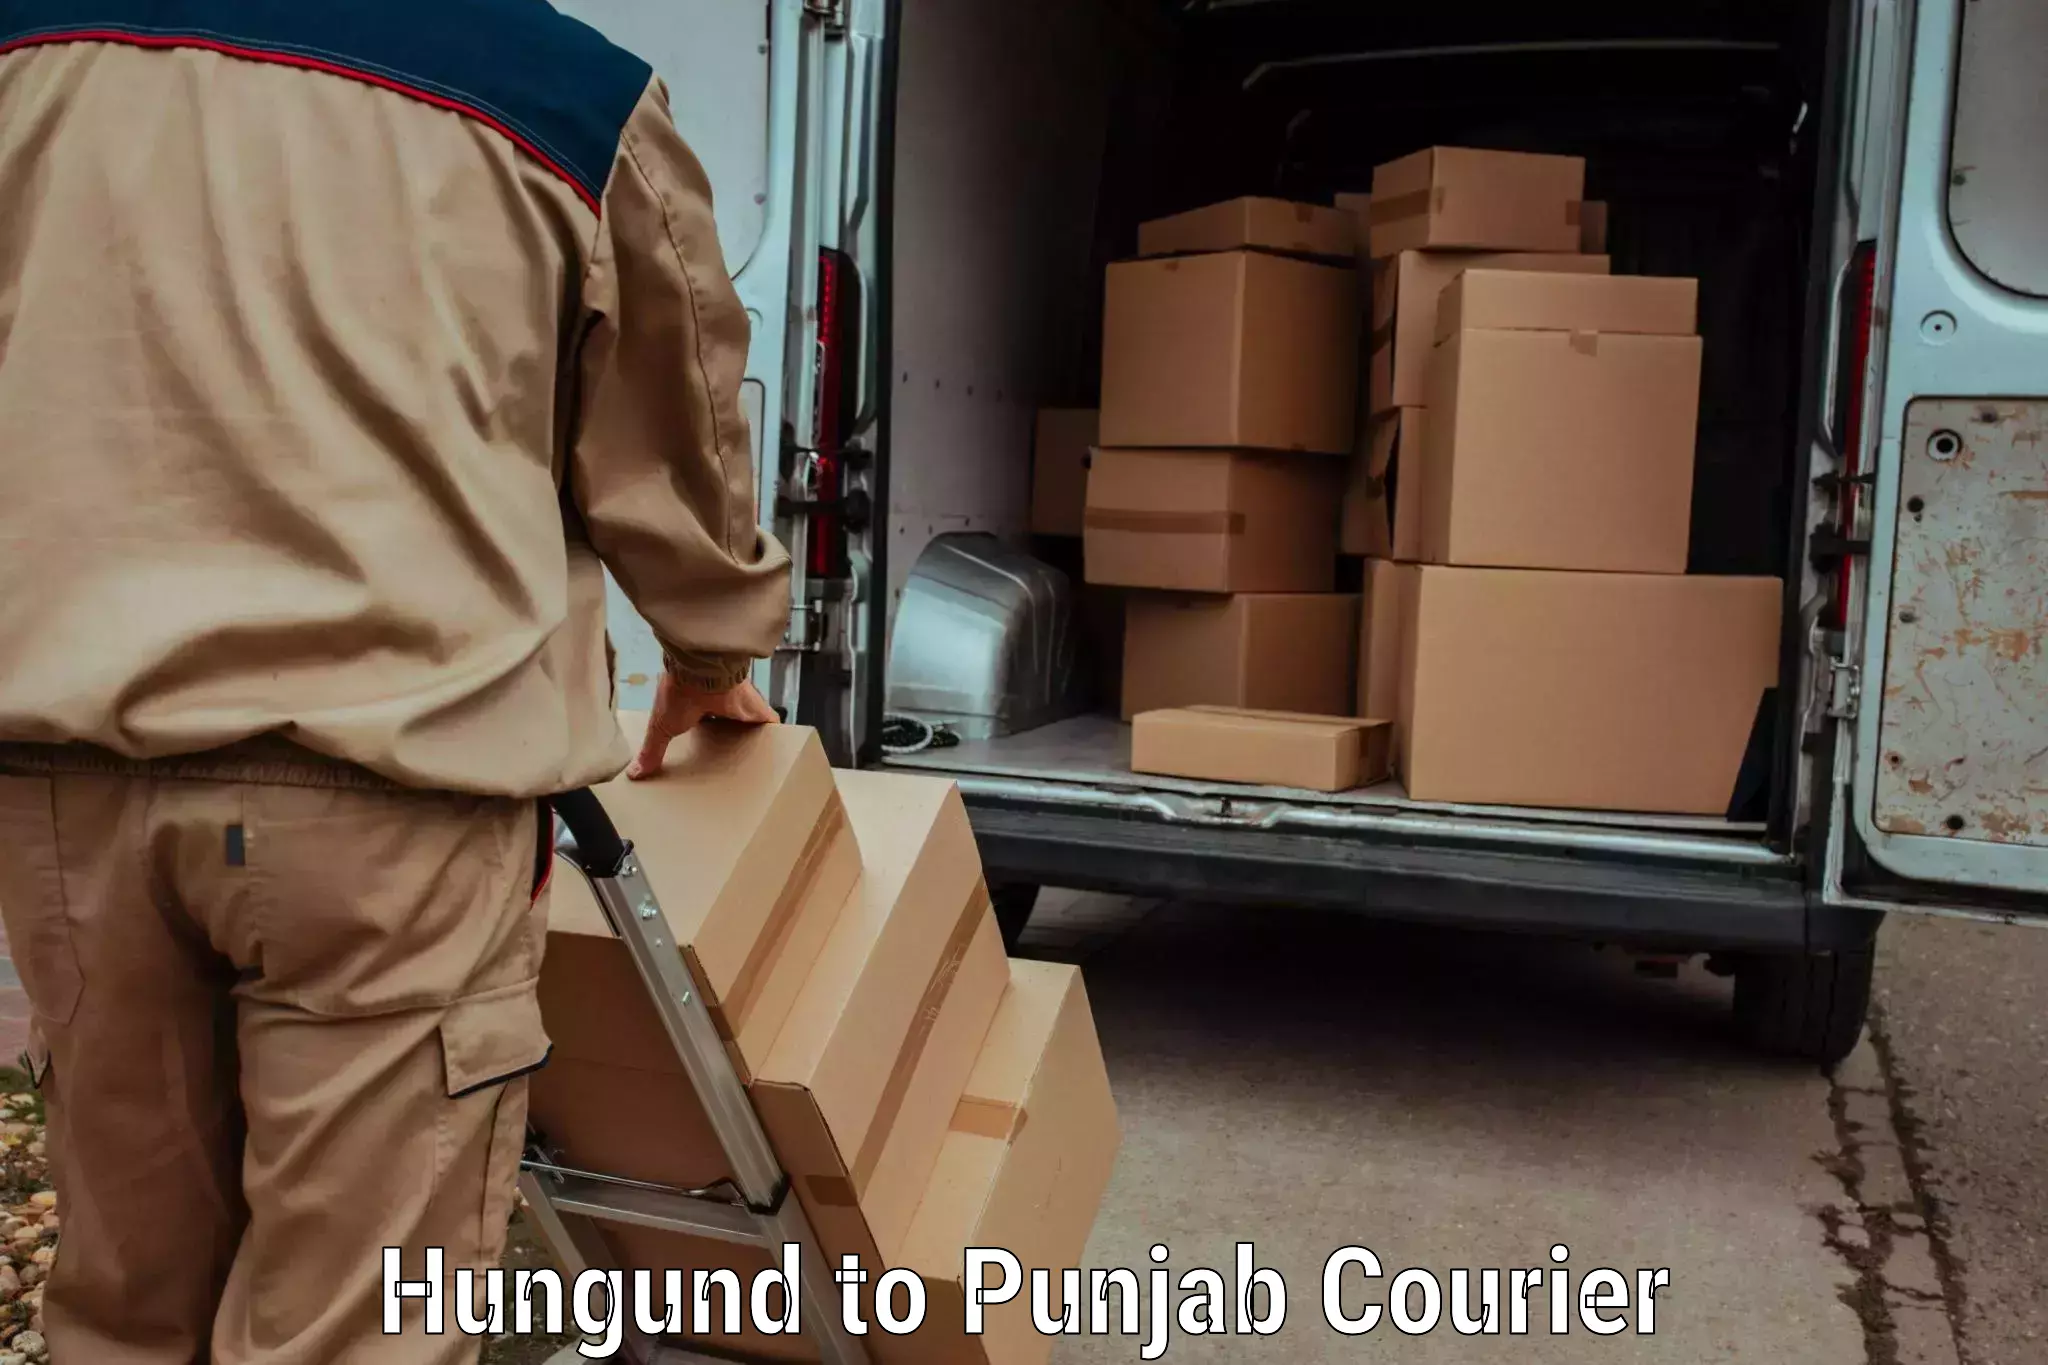 Cash on delivery service Hungund to Punjab